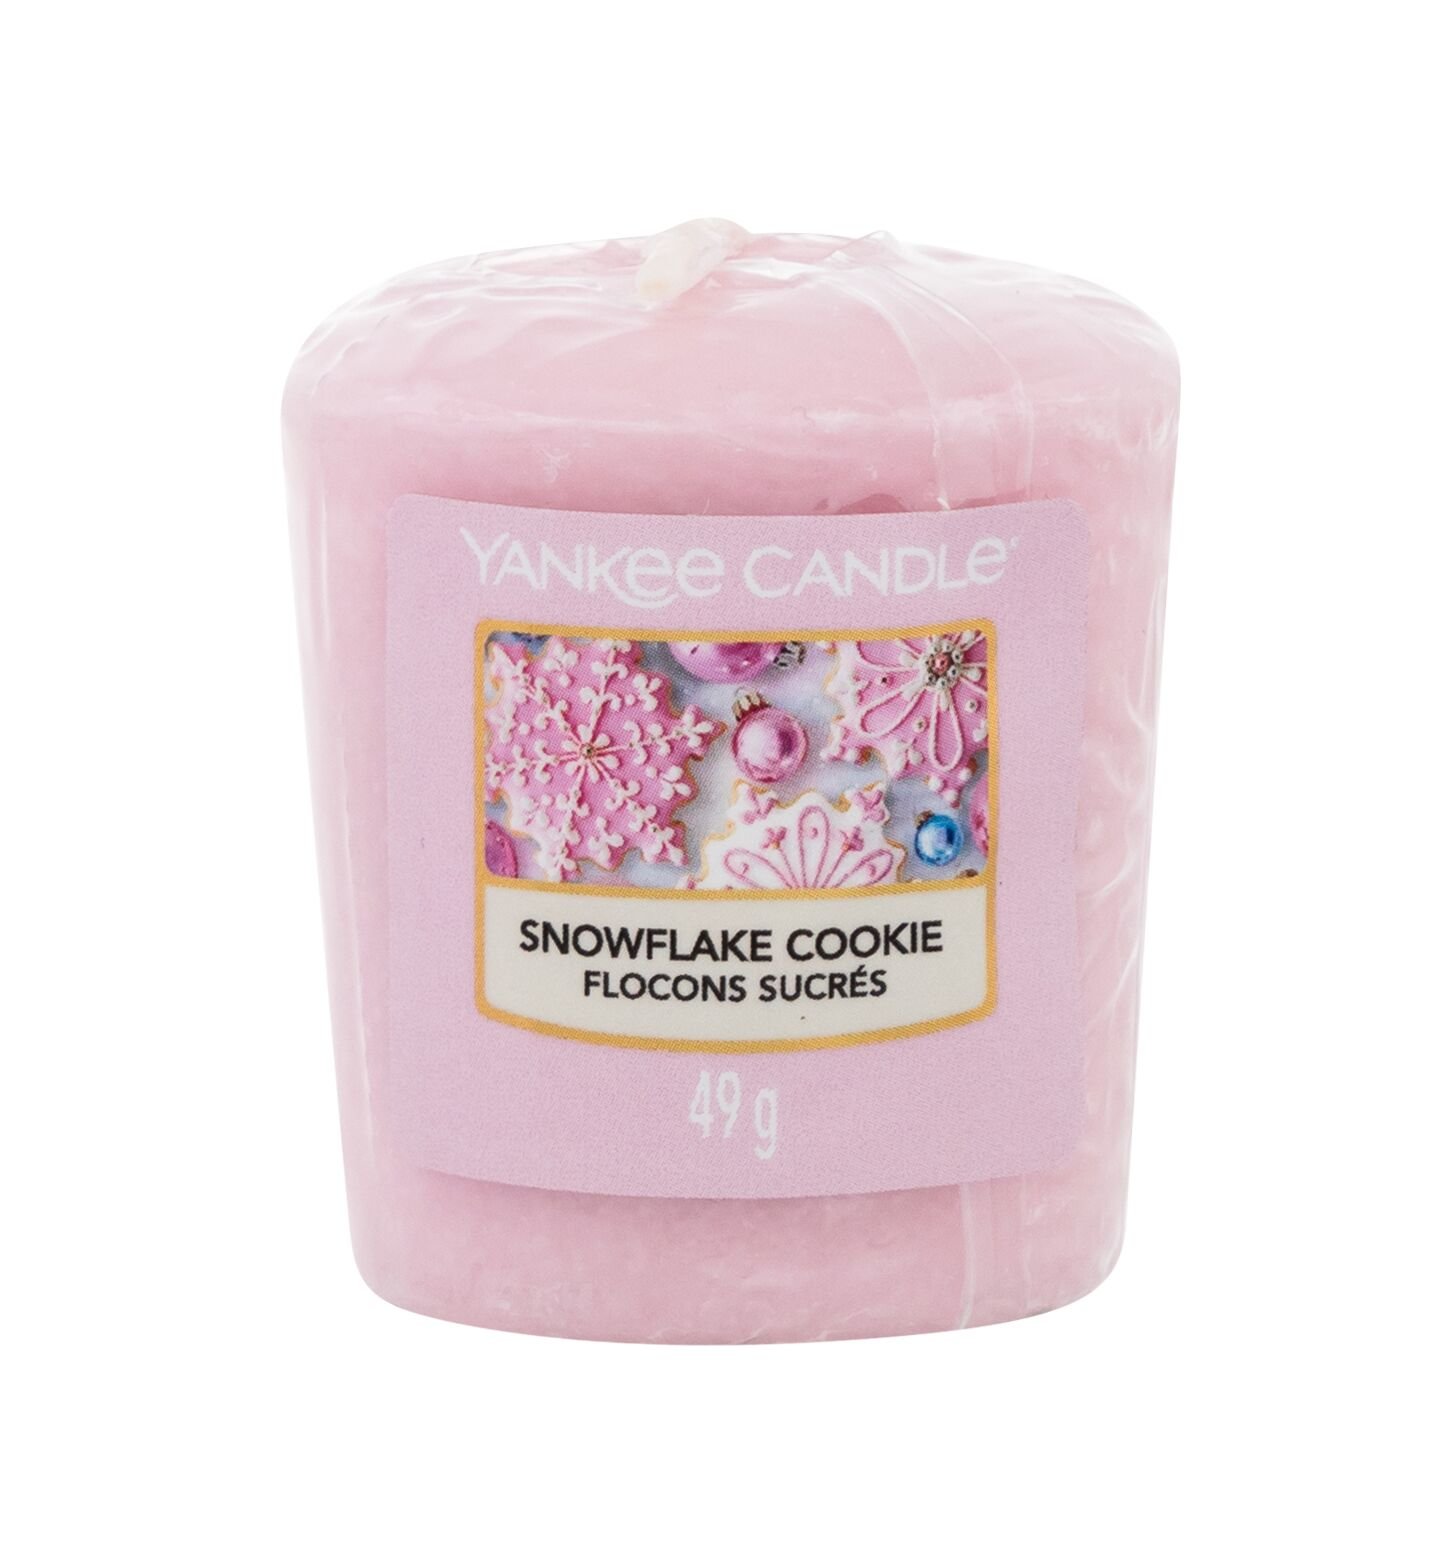 Yankee Candle Snowflake Cookie 49g Kvepalai Unisex Scented Candle